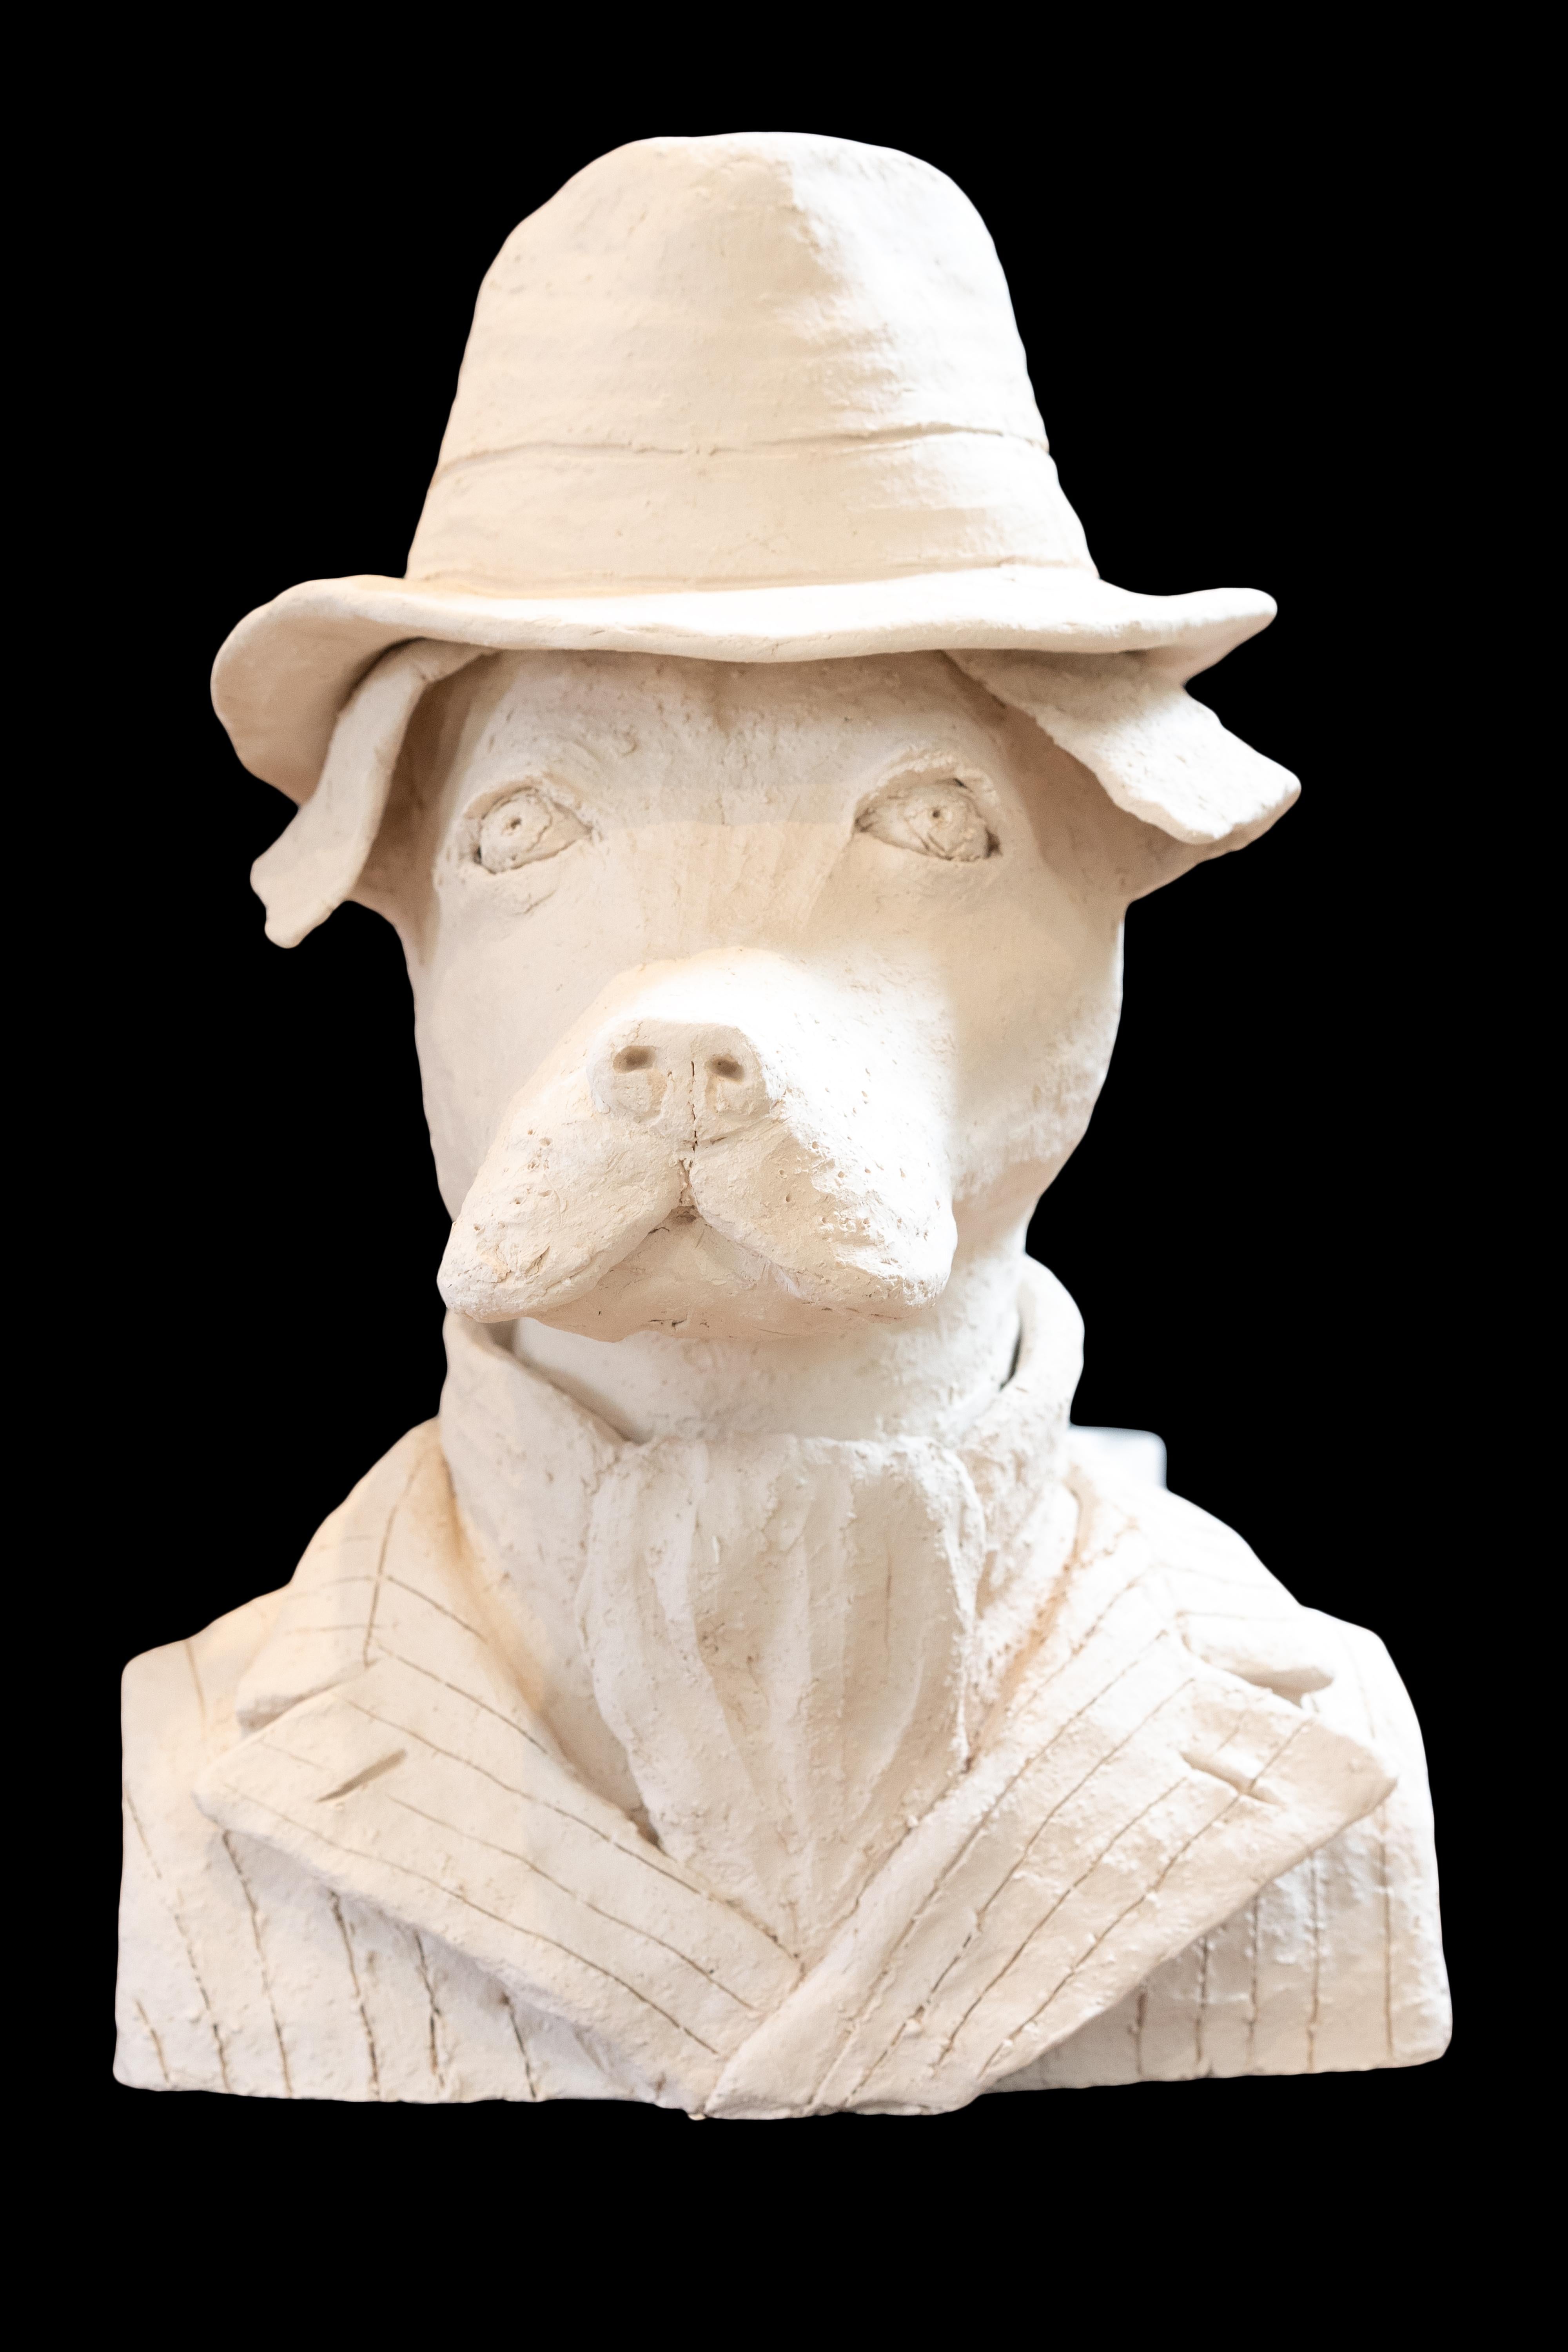 Terracotta Anthropomorphic bust of dog. A charming and one-of-a-kind sculpture.

Made in France.

Measures approximately: 10